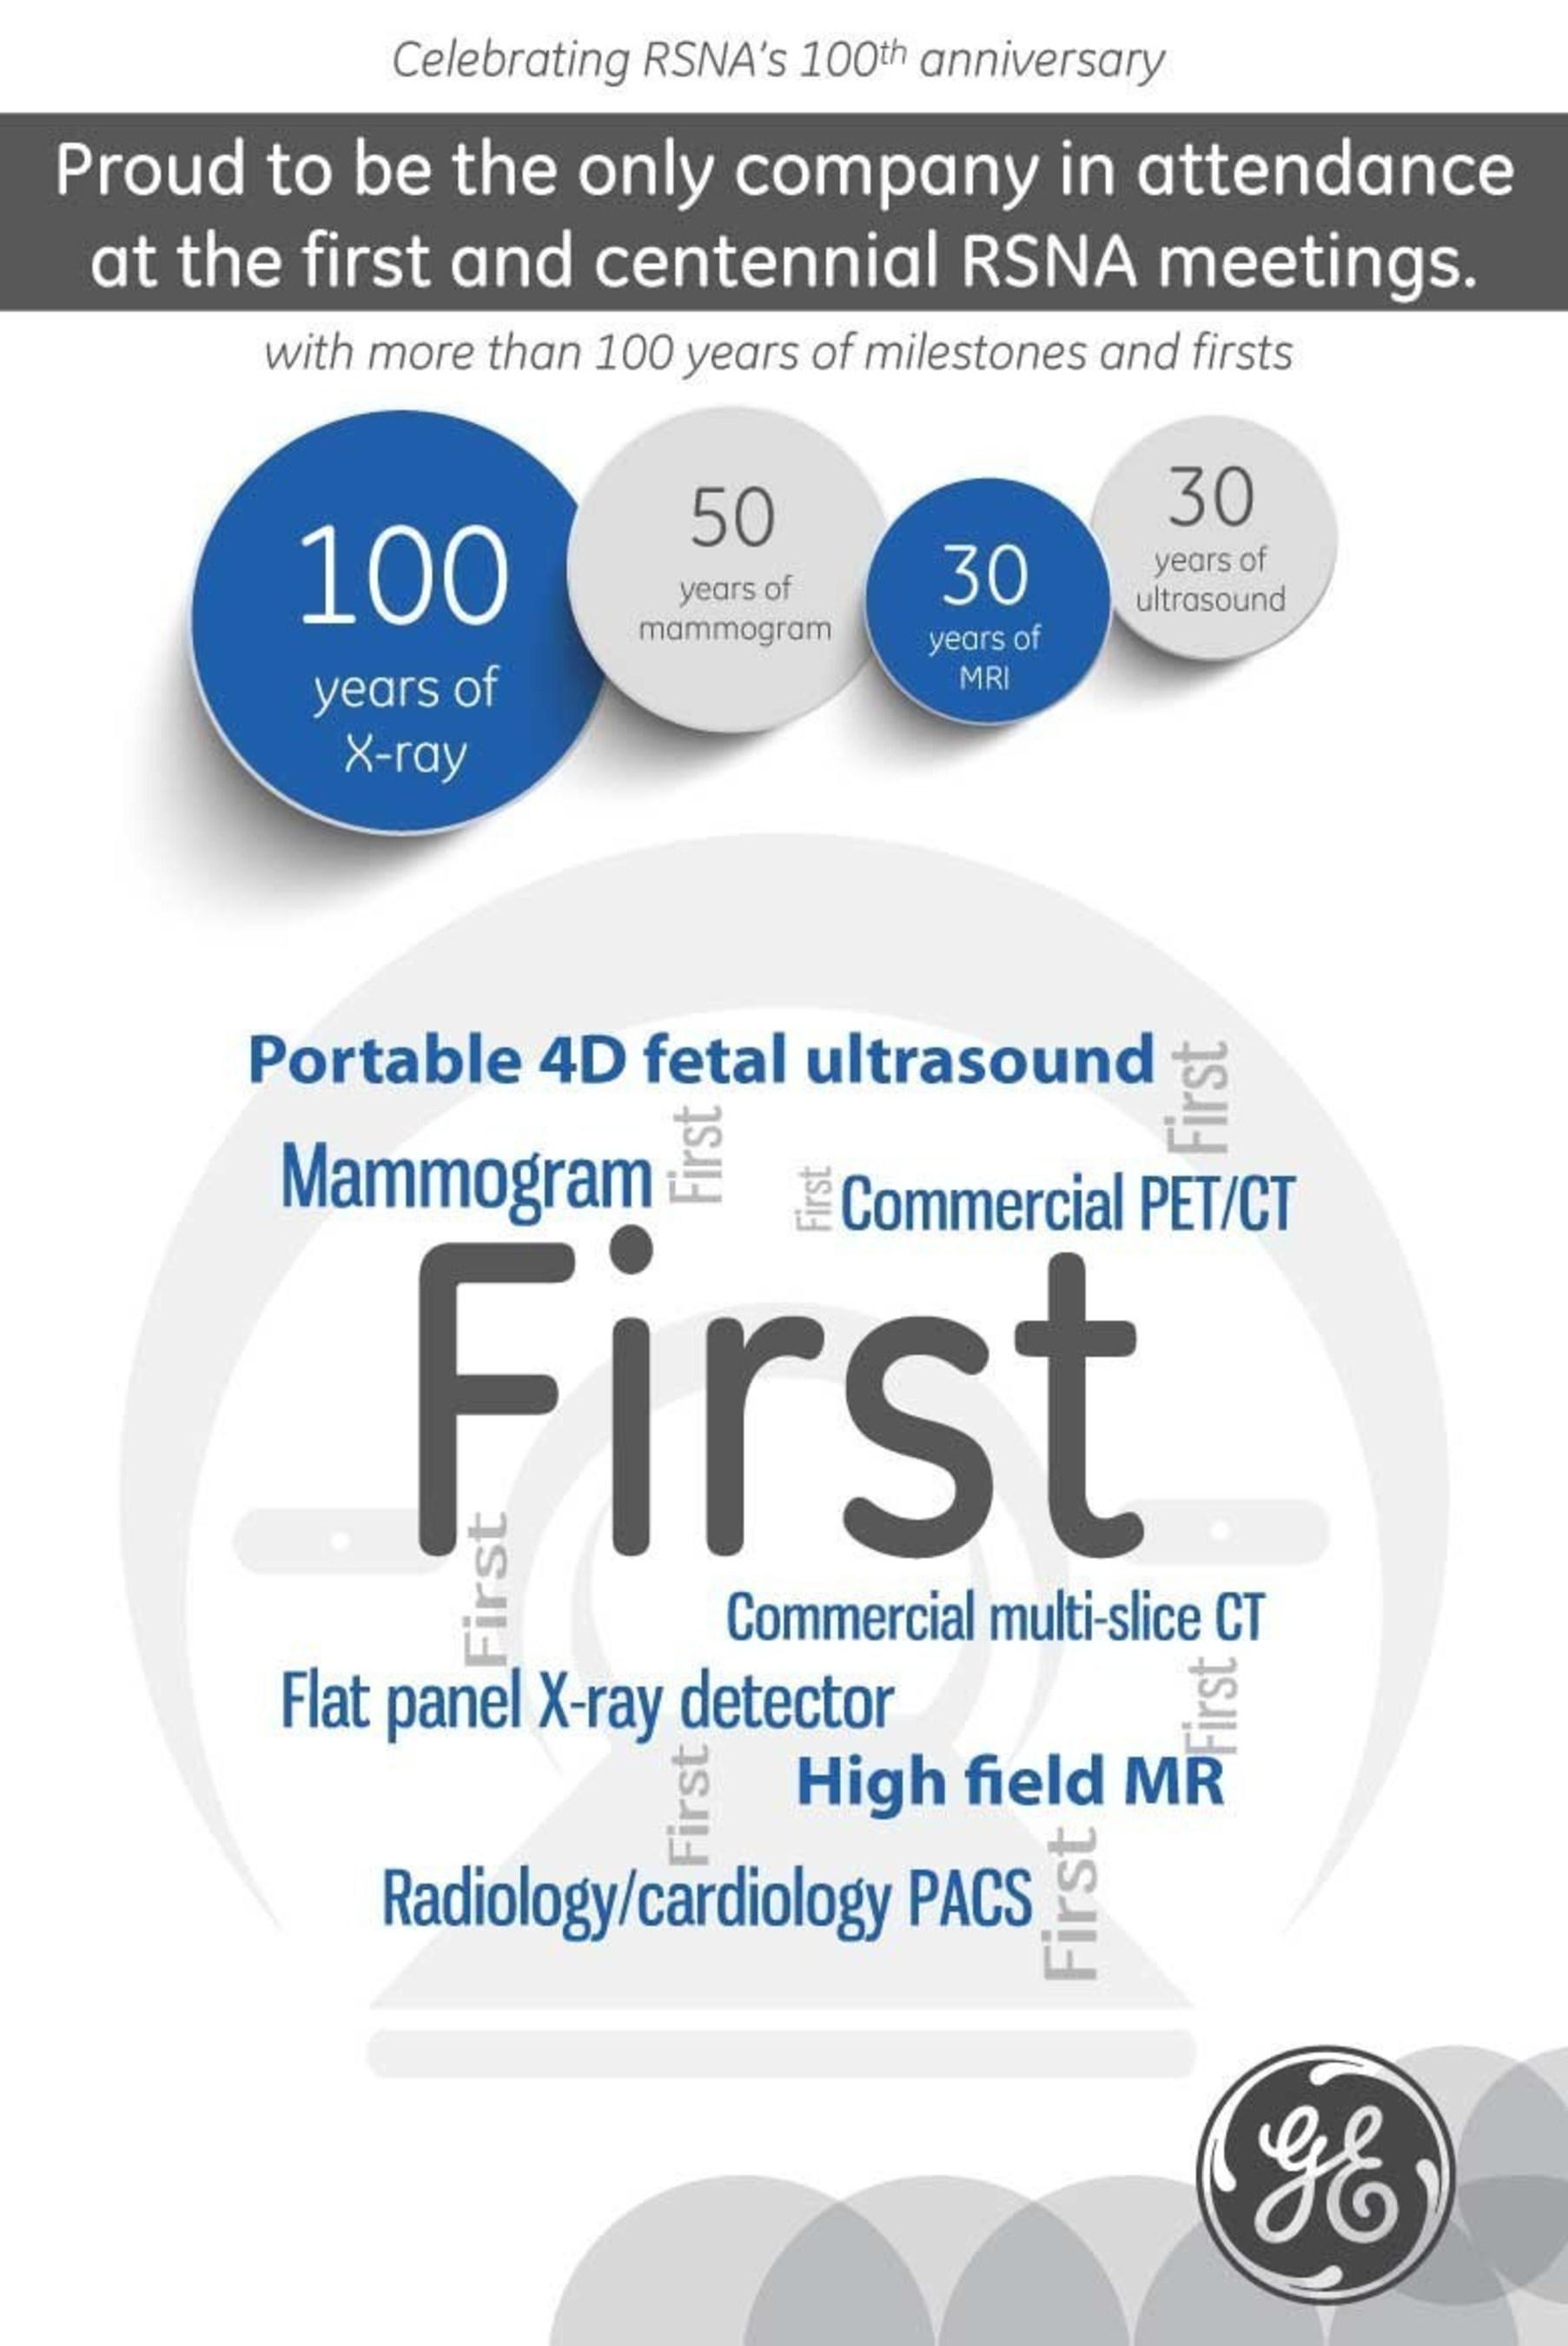 A century of firsts: Edison's brainchild advancing the future at 100th RSNA